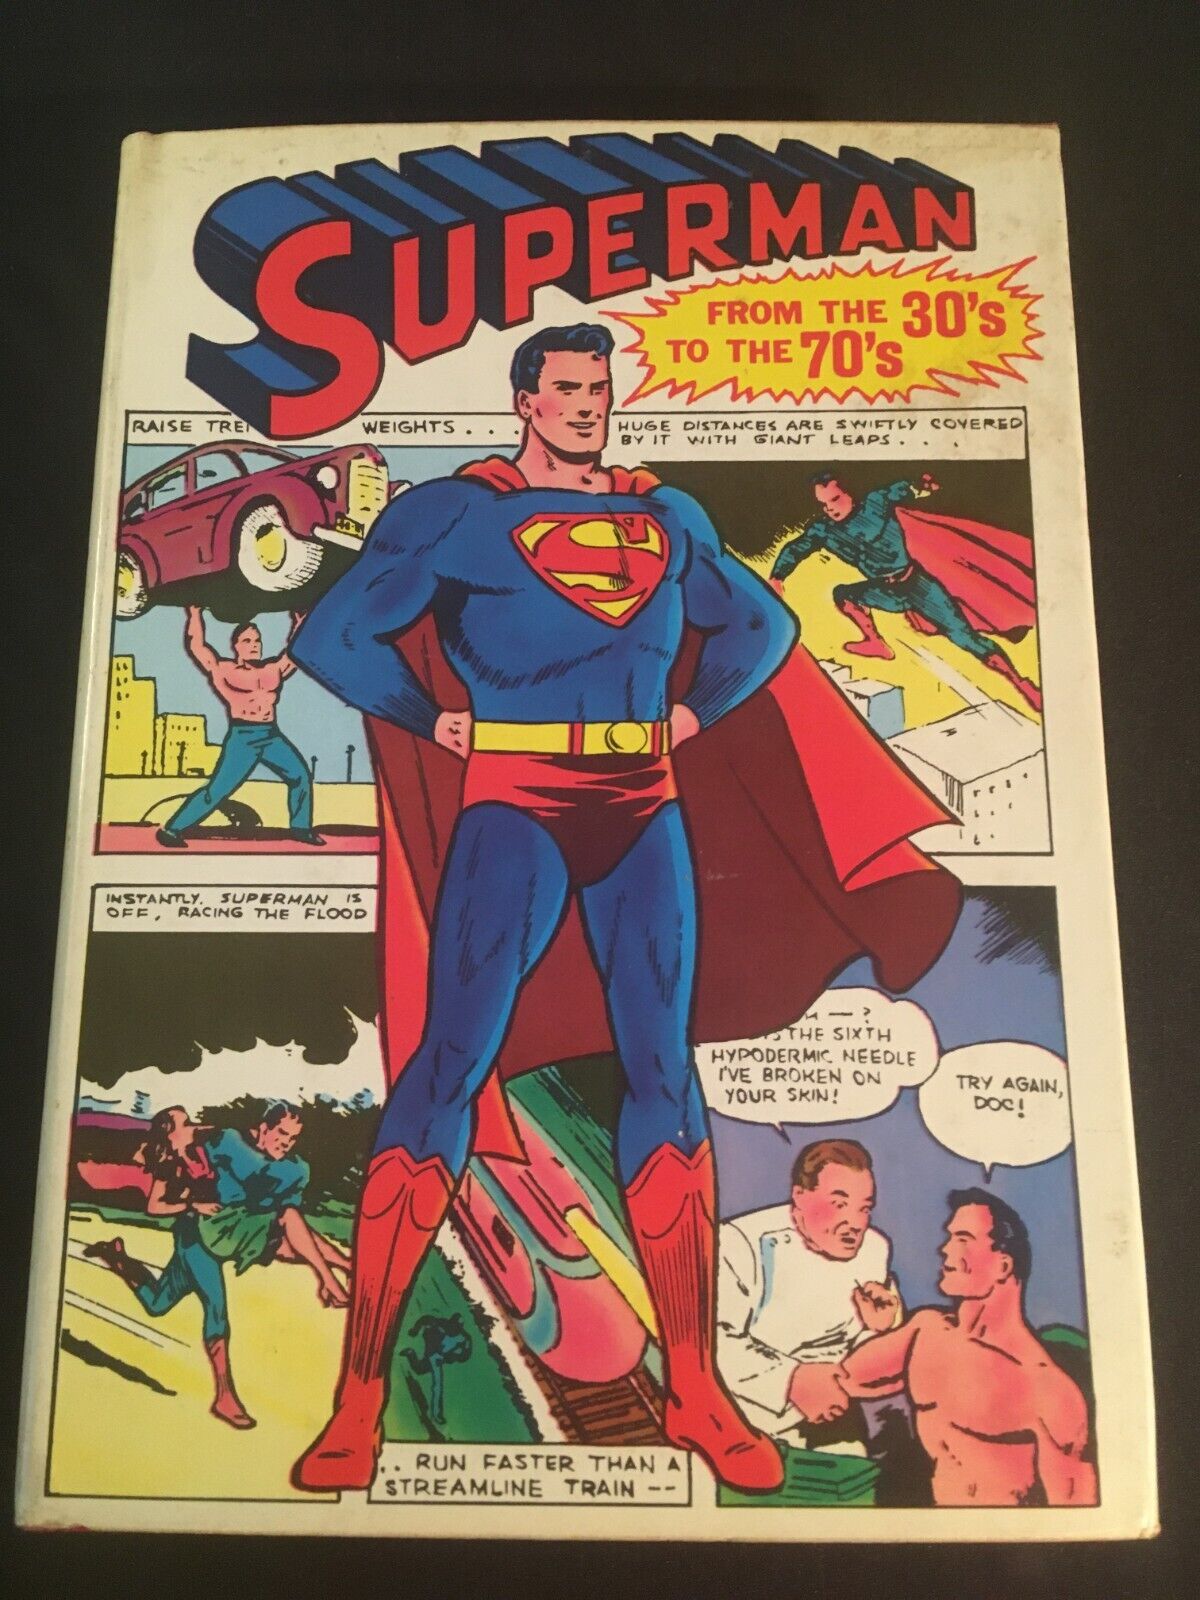 SUPERMAN: FROM THE 30\'s TO THE 70\'s Hardcover, Crown Publ., 1971